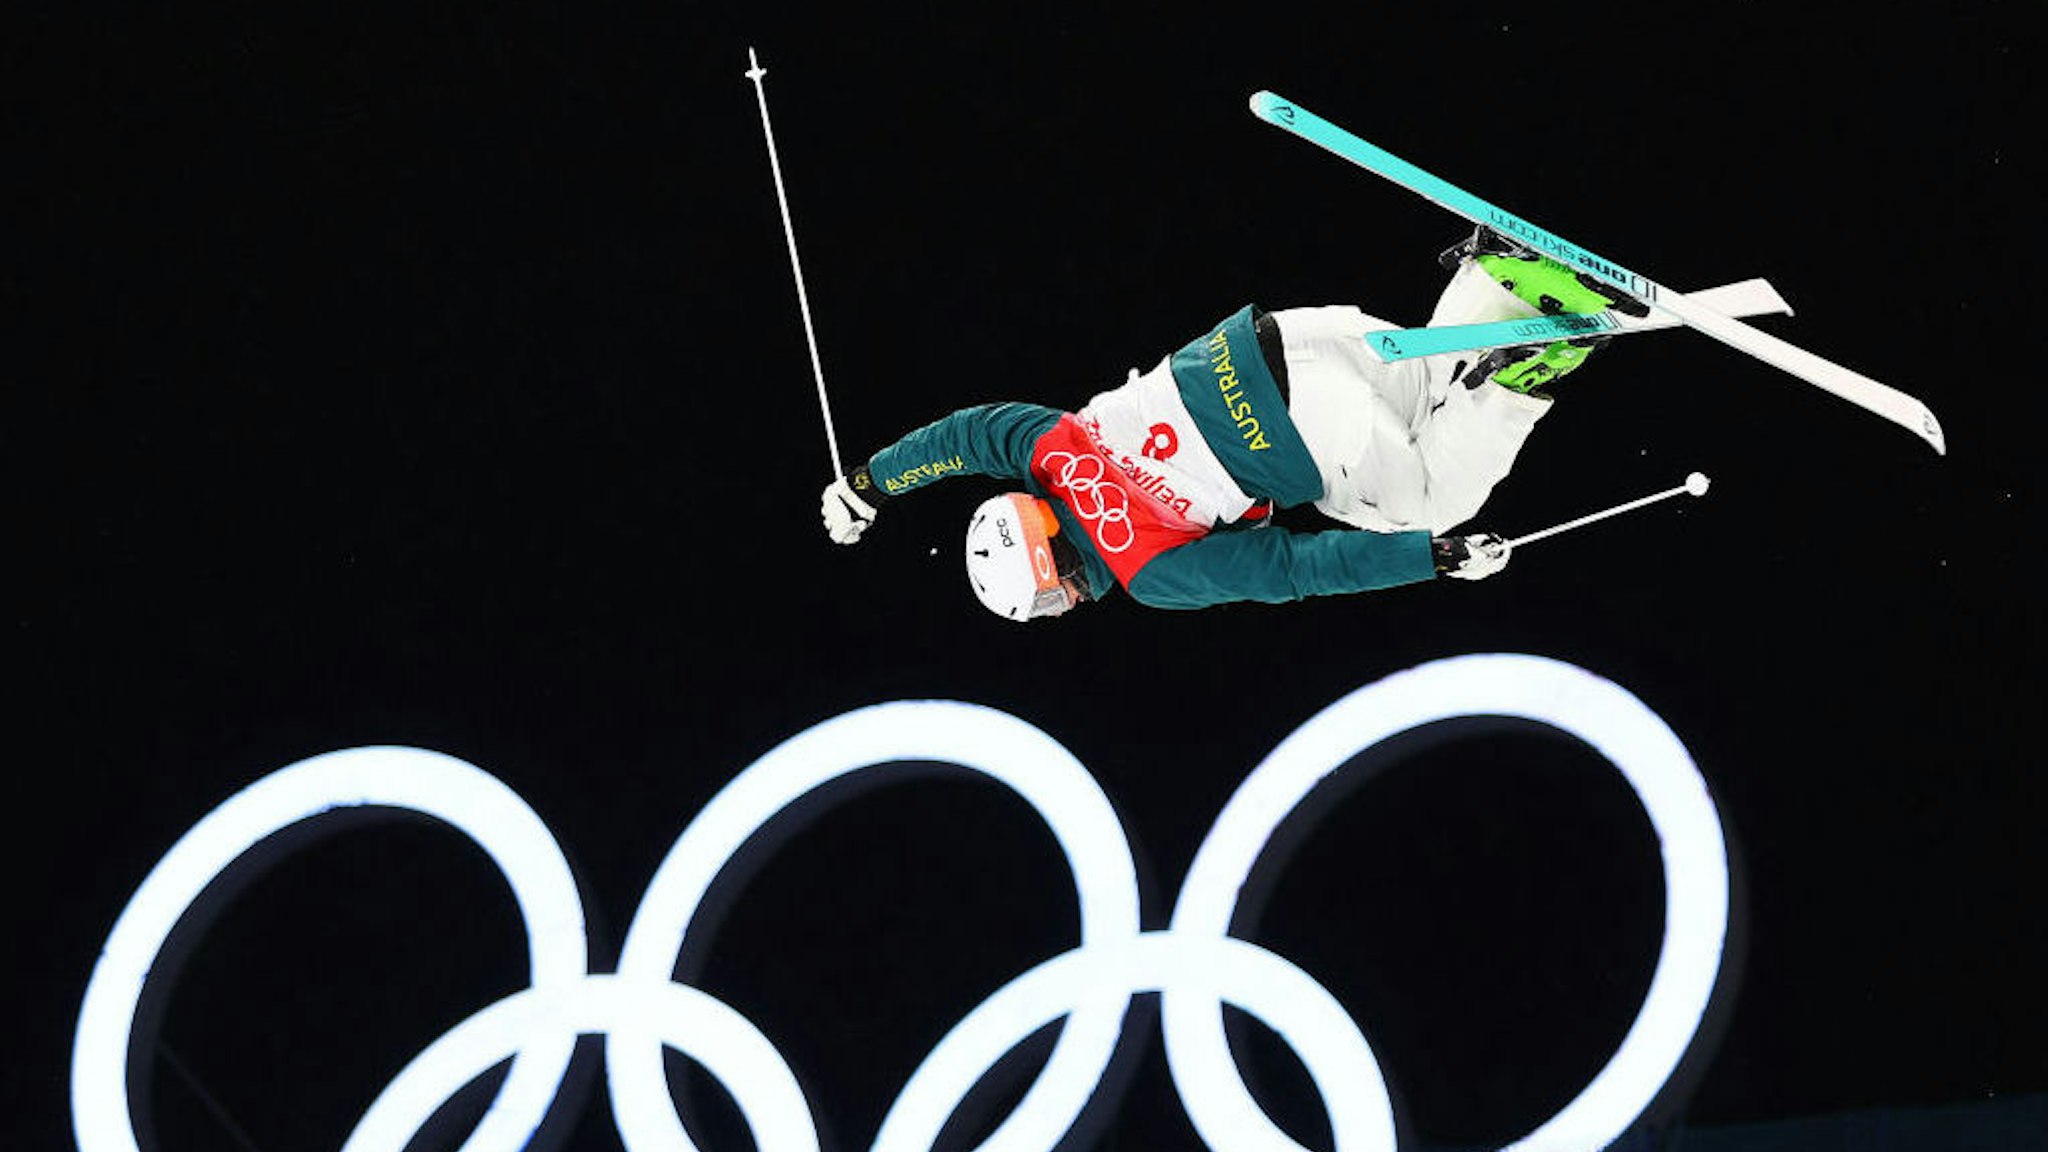 ZHANGJIAKOU, CHINA - JANUARY 31: Brodie Summers of Team Australia skis during the Men's/Women's Freestyle Skiing Moguls Training session at the Genting Snow Park on January 31, 2022 in Zhangjiakou, China. (Photo by Clive Rose/Getty Images)